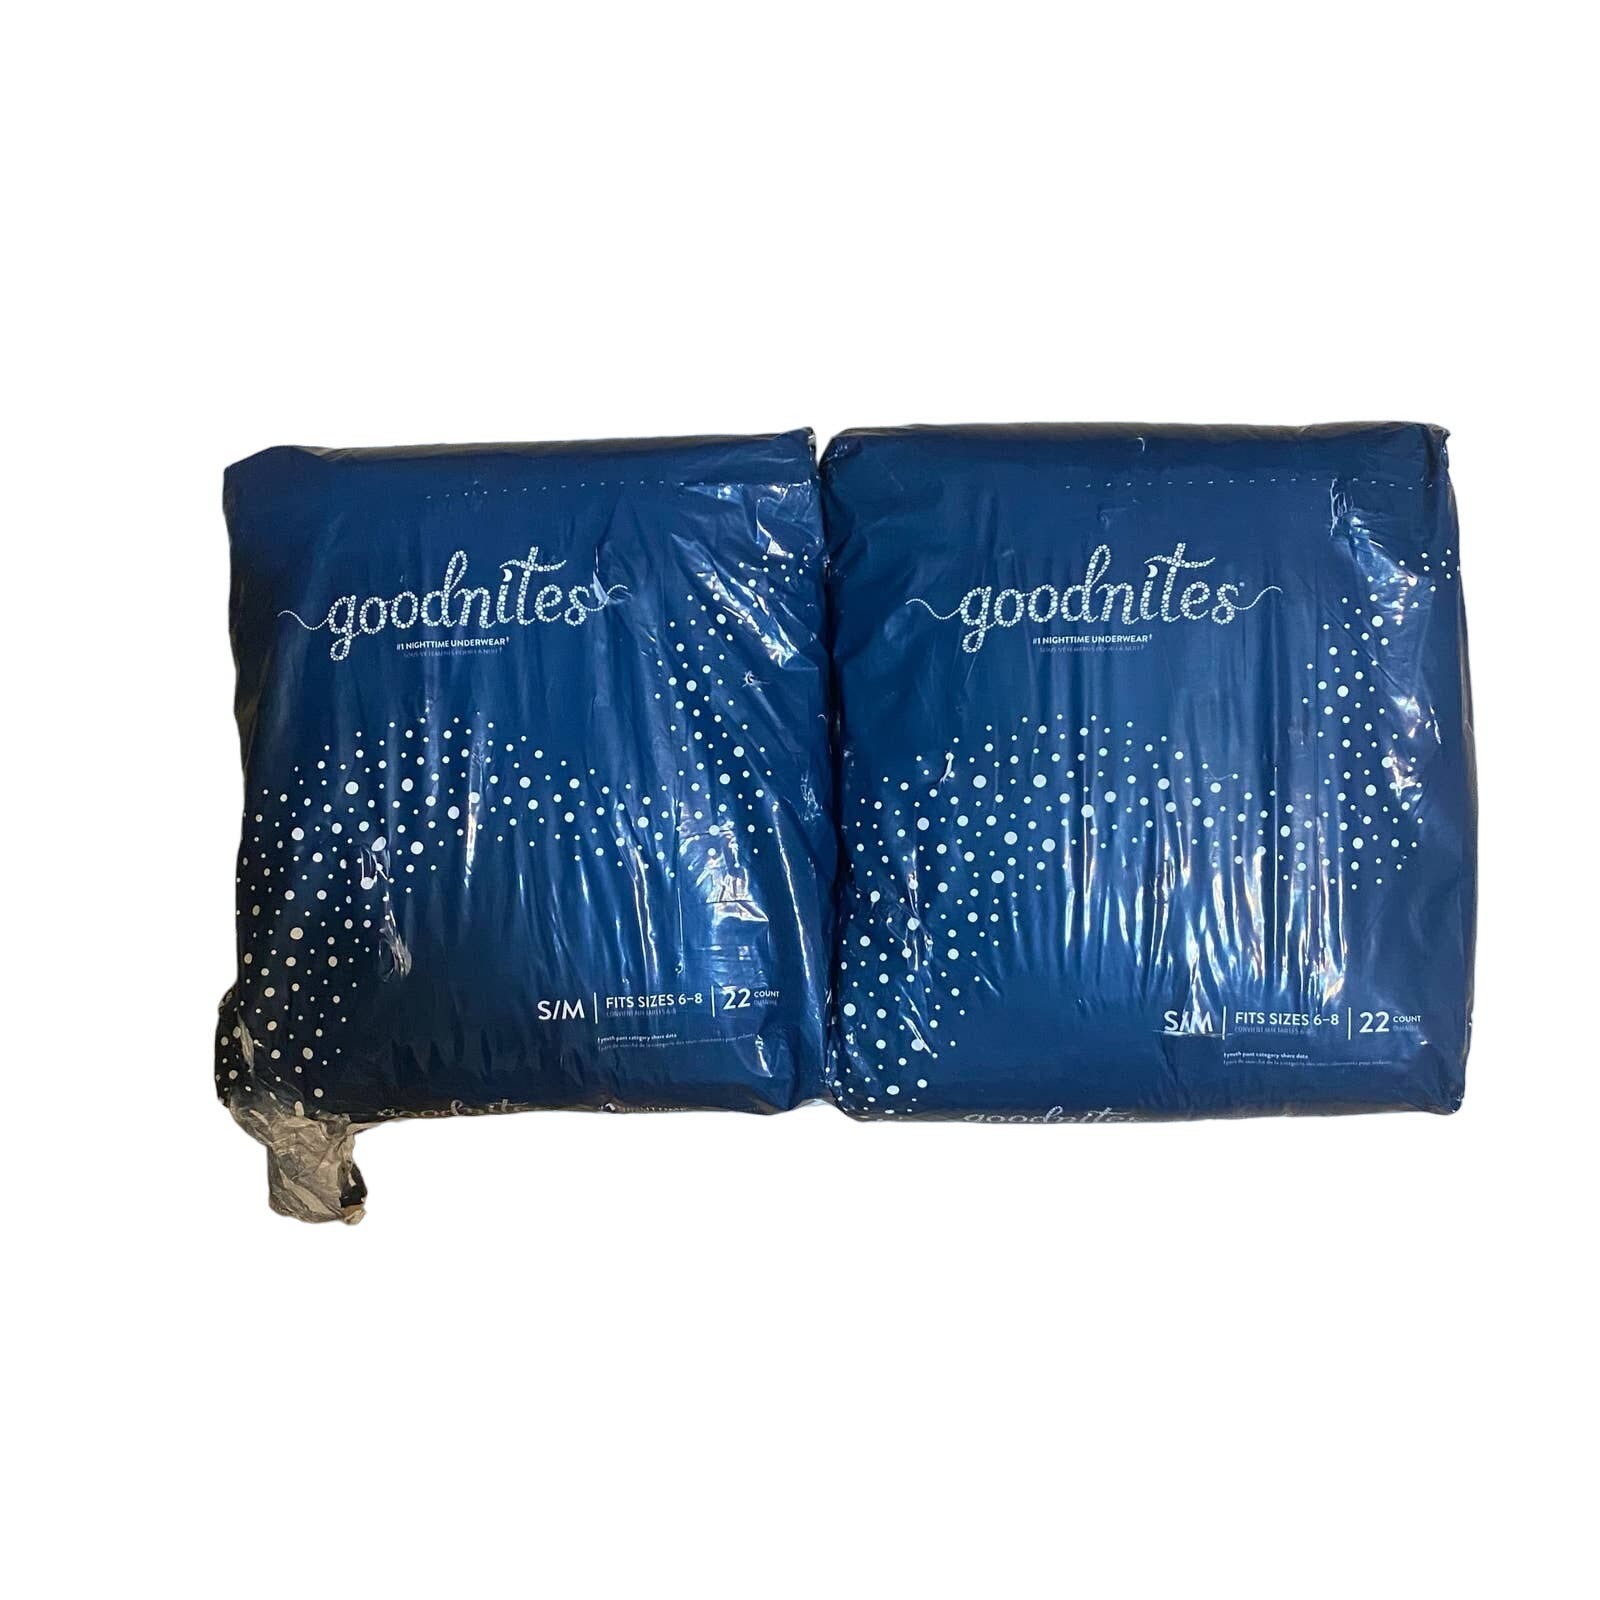 GoodNites Nighttime Underwear Pull Ups Size S/M Fits Ages 6-8  2 packs  - $31.99